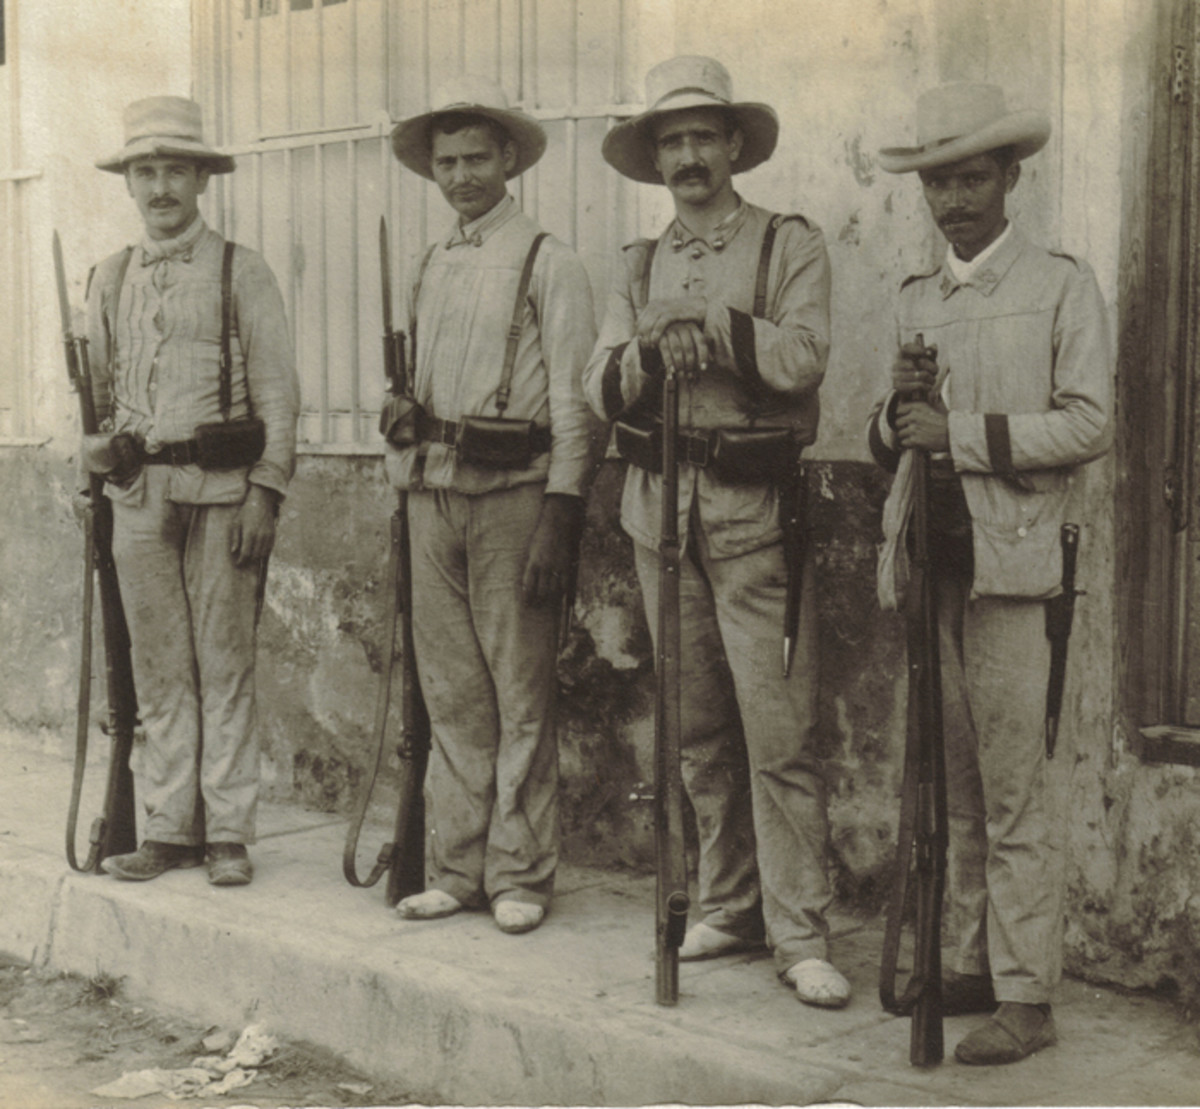 Spanish soldiers in Cuba, 1898. The Infantryman on the reader’s right is from the 38th. Regiment “León”. His three comrades are Artillerymen. All wear variations of the blue and white pin-striped cotton rayadillo uniform.